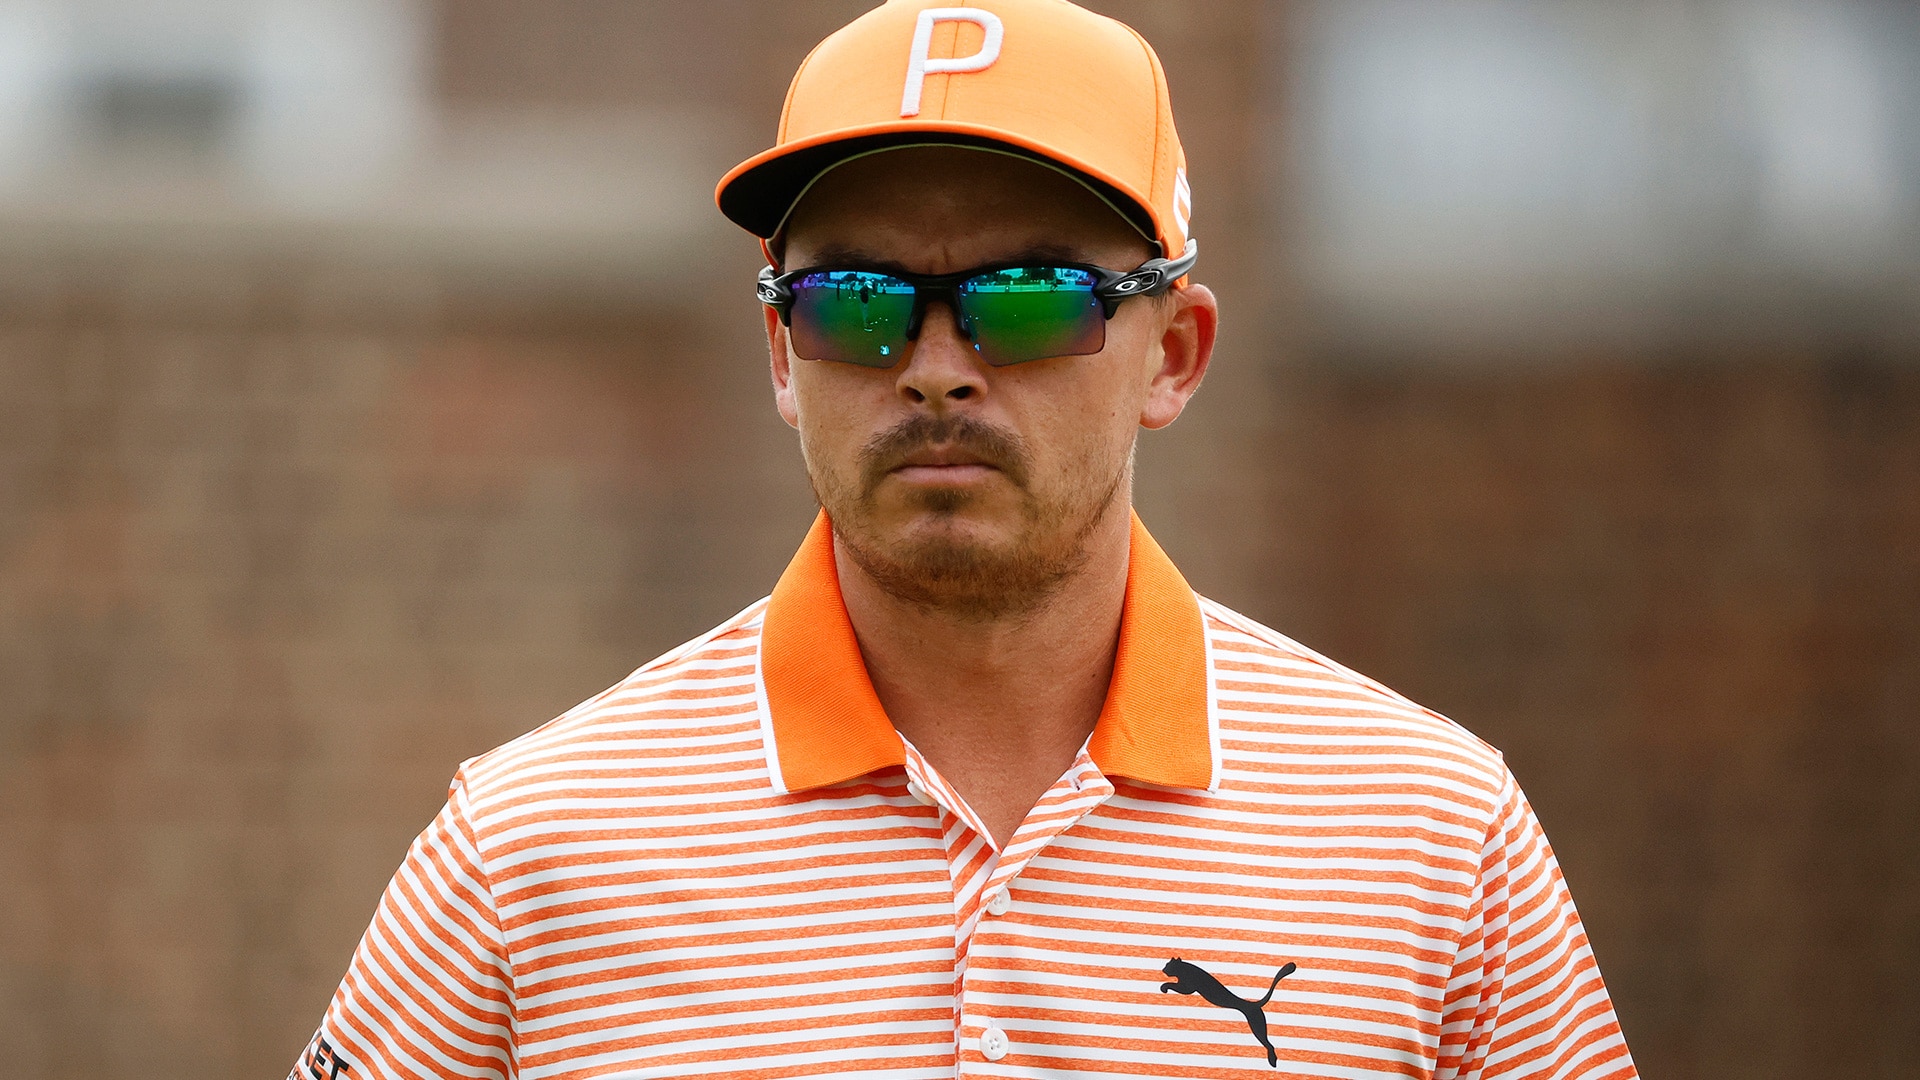 2023 Rocket Mortgage Classic payout: What Rickie Fowler and Co. earned